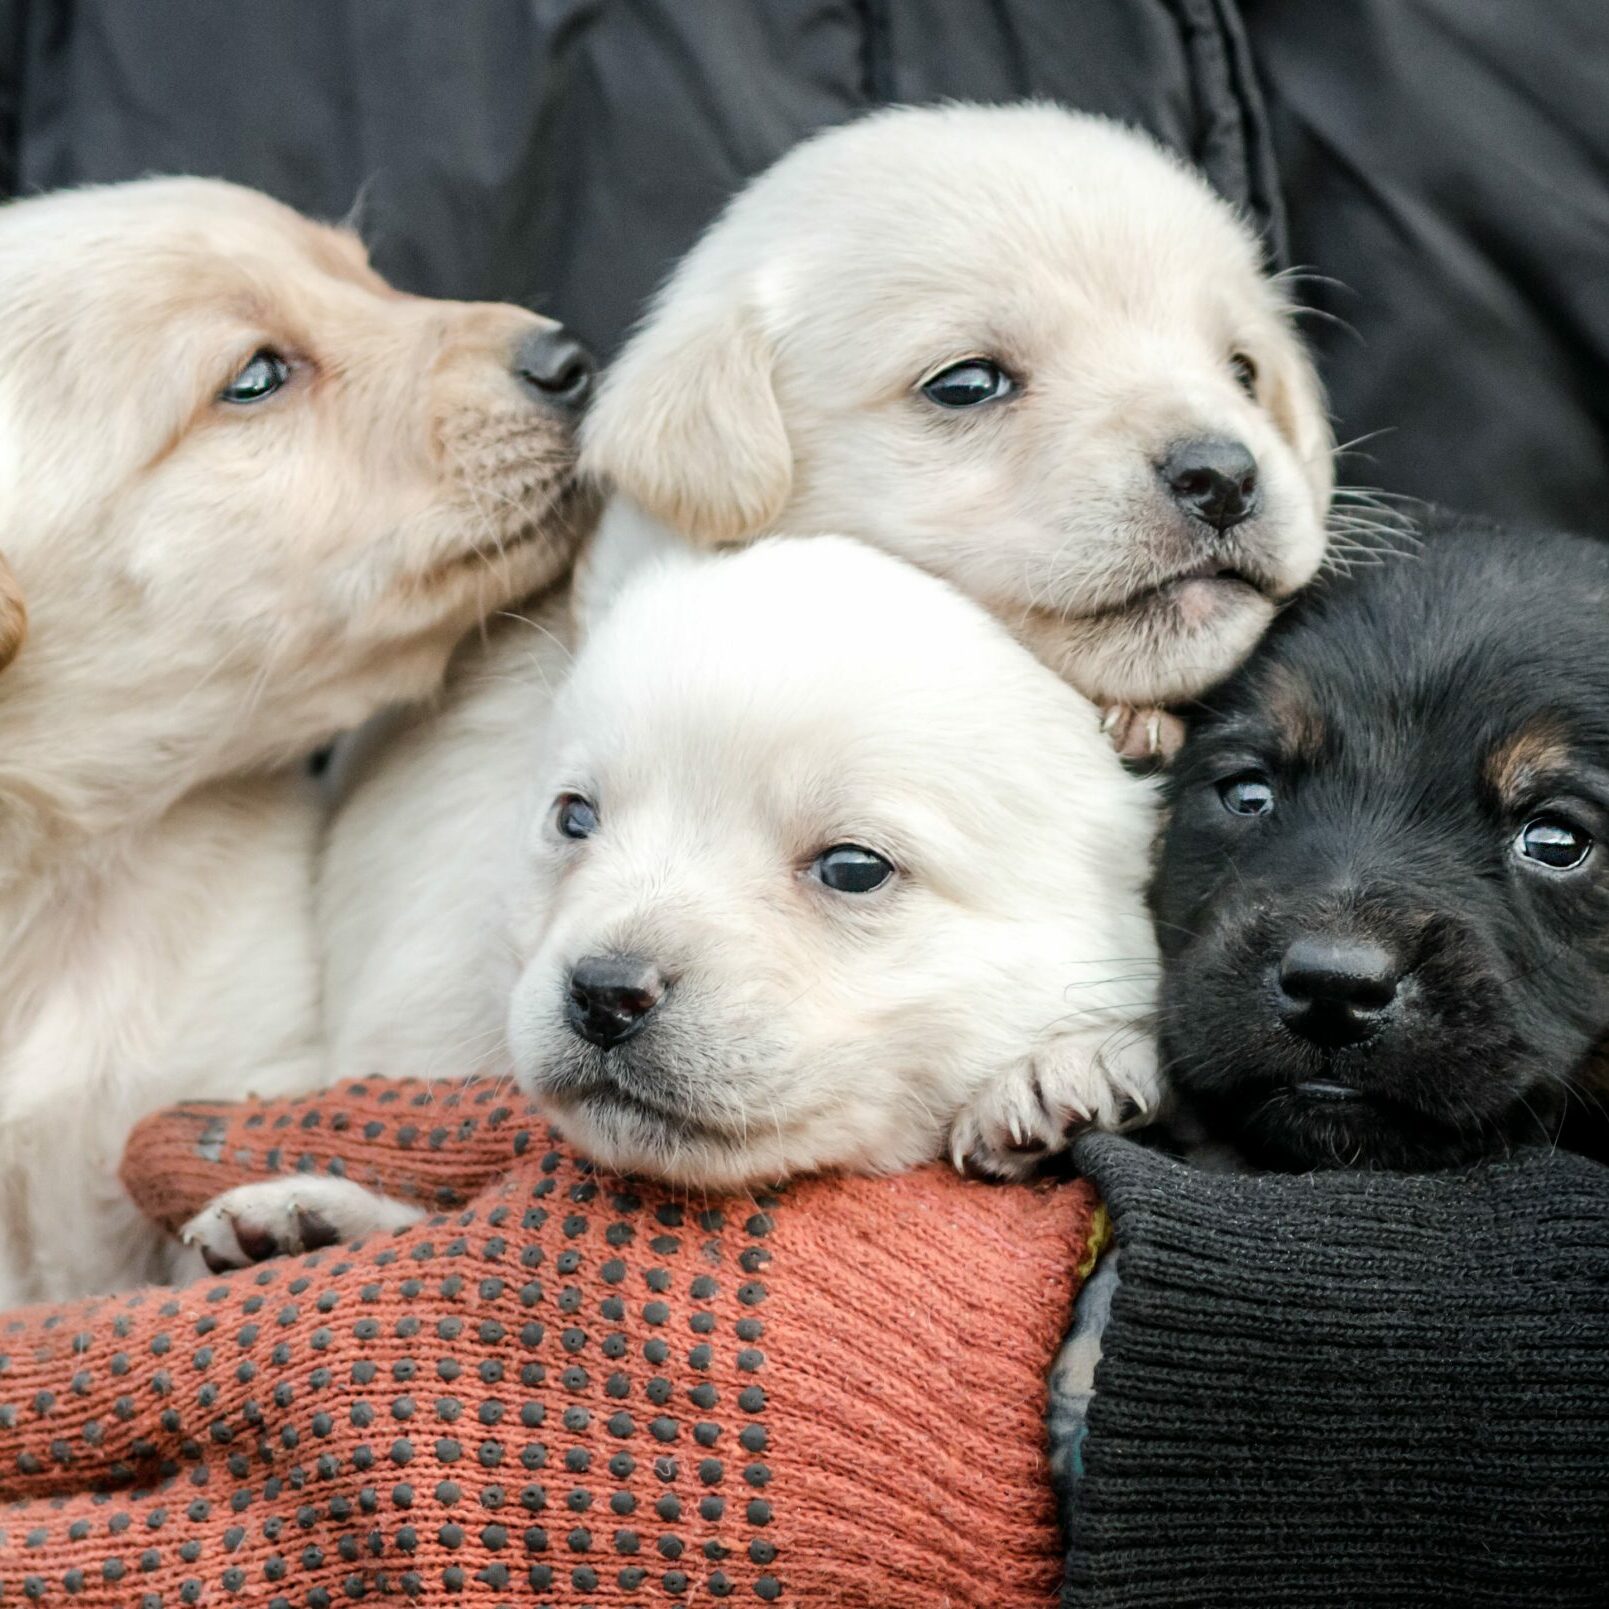 bunch of four little puppies in human hands close up